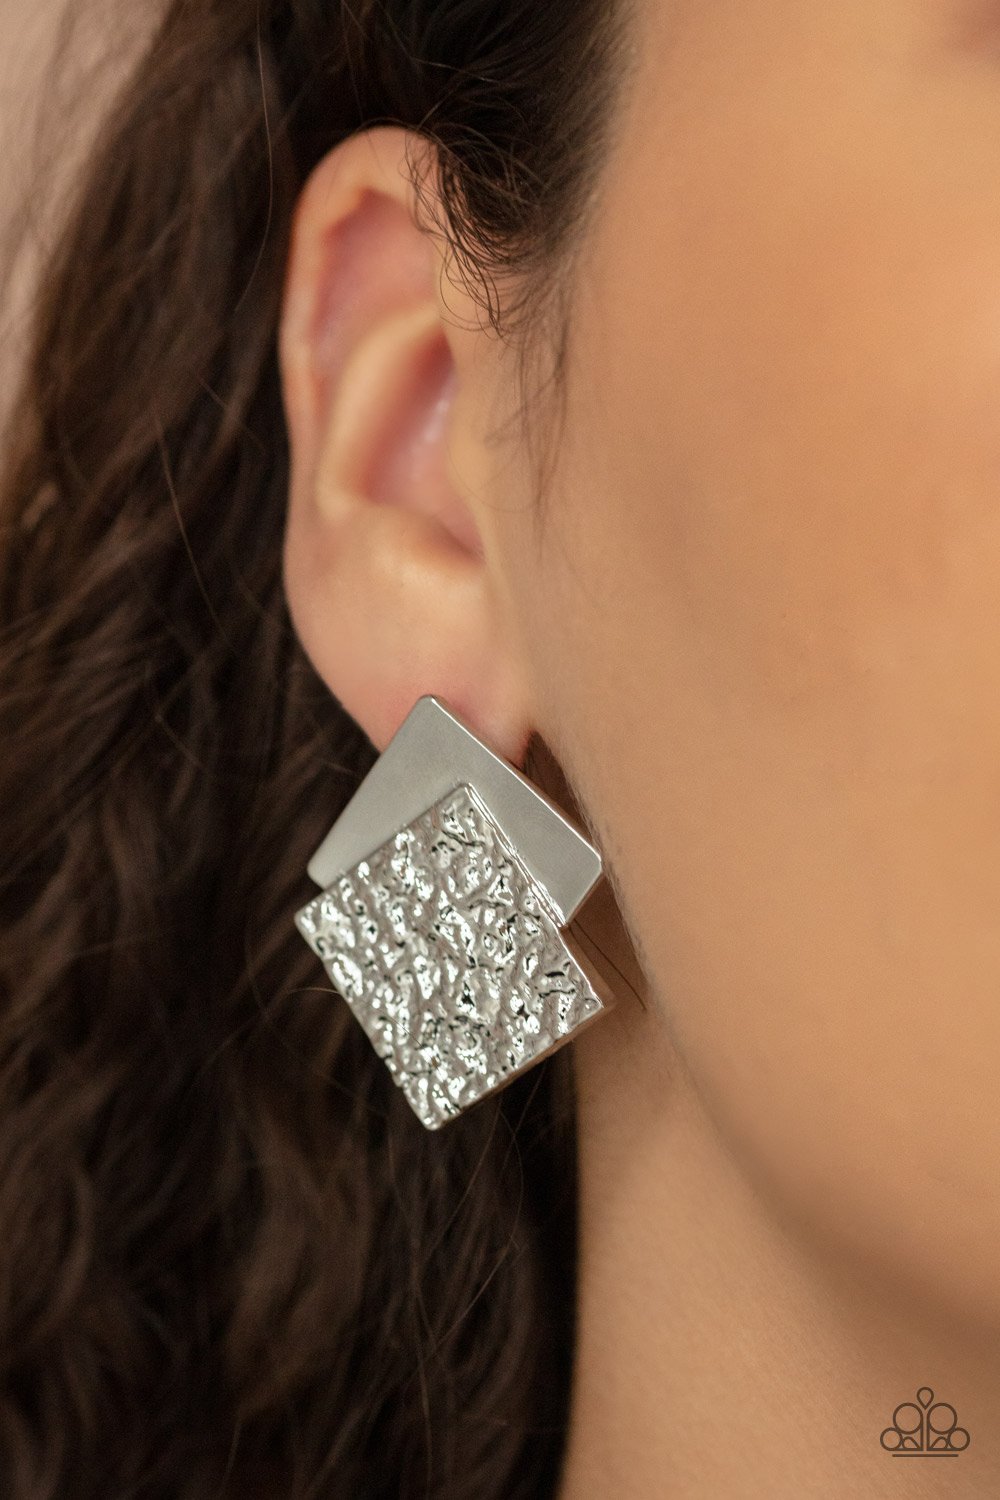 Paparazzi Square With Style Silver Post Earrings